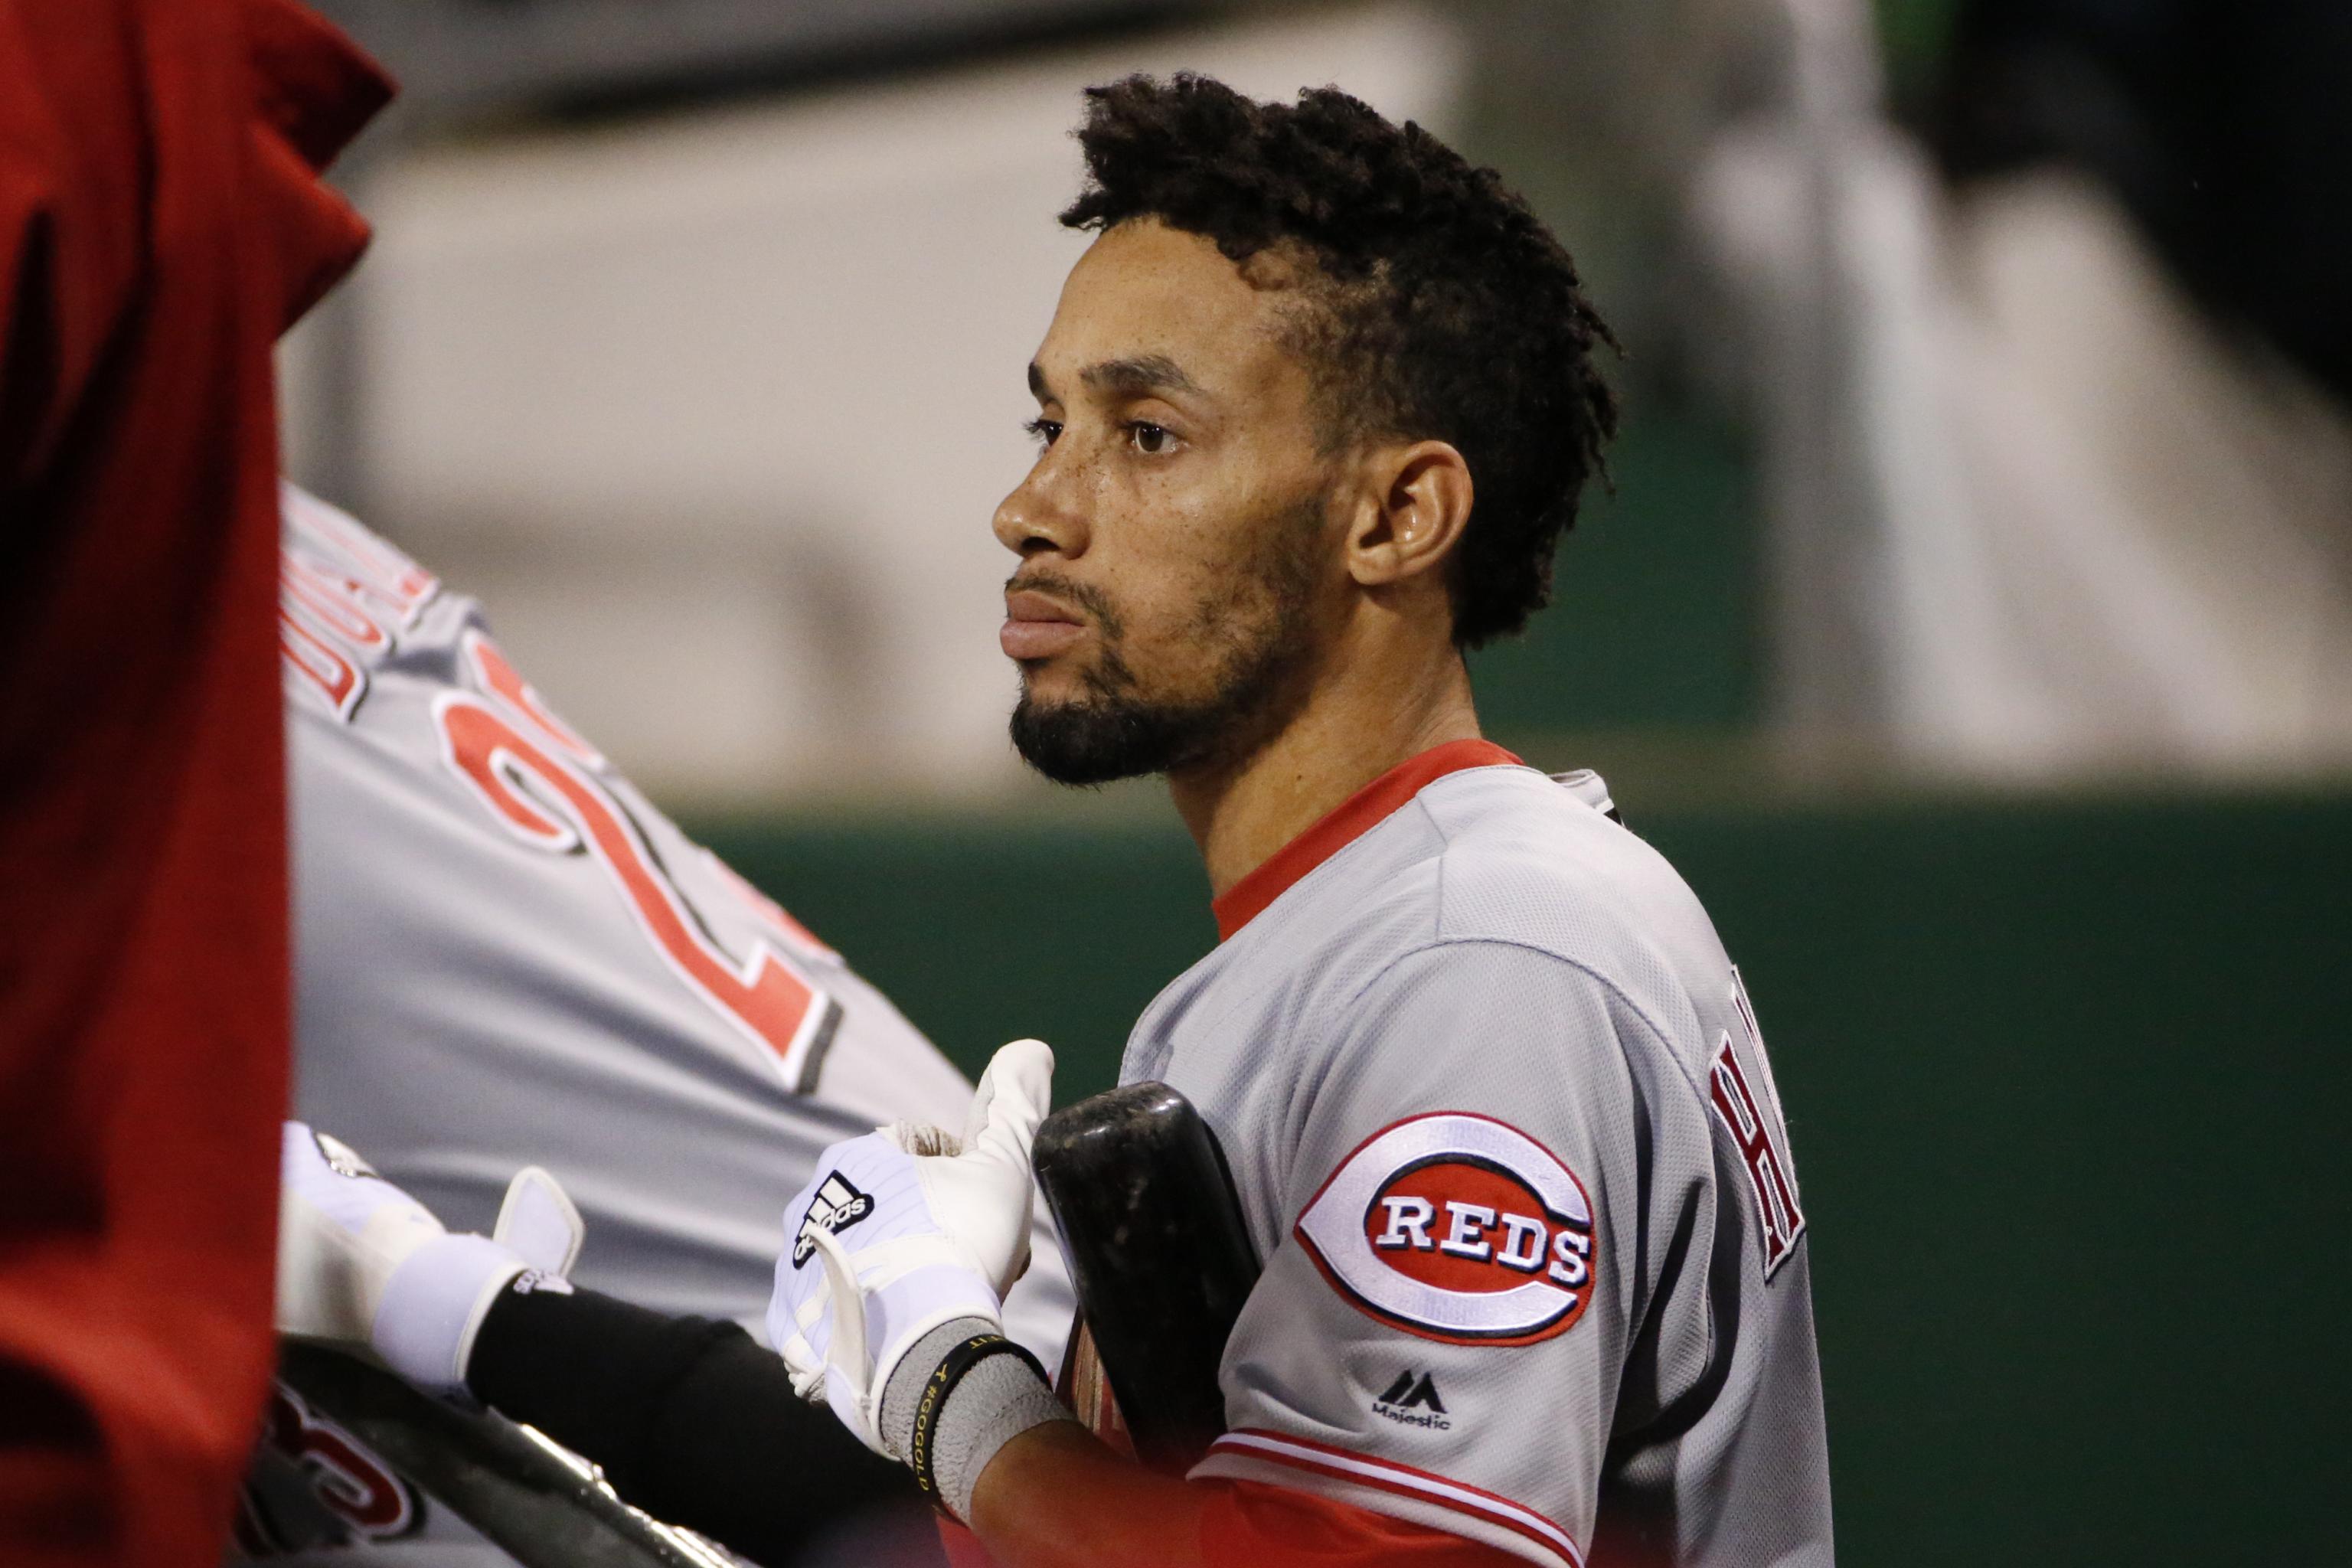 Billy Hamilton remains out of Reds' lineup with concussion - NBC